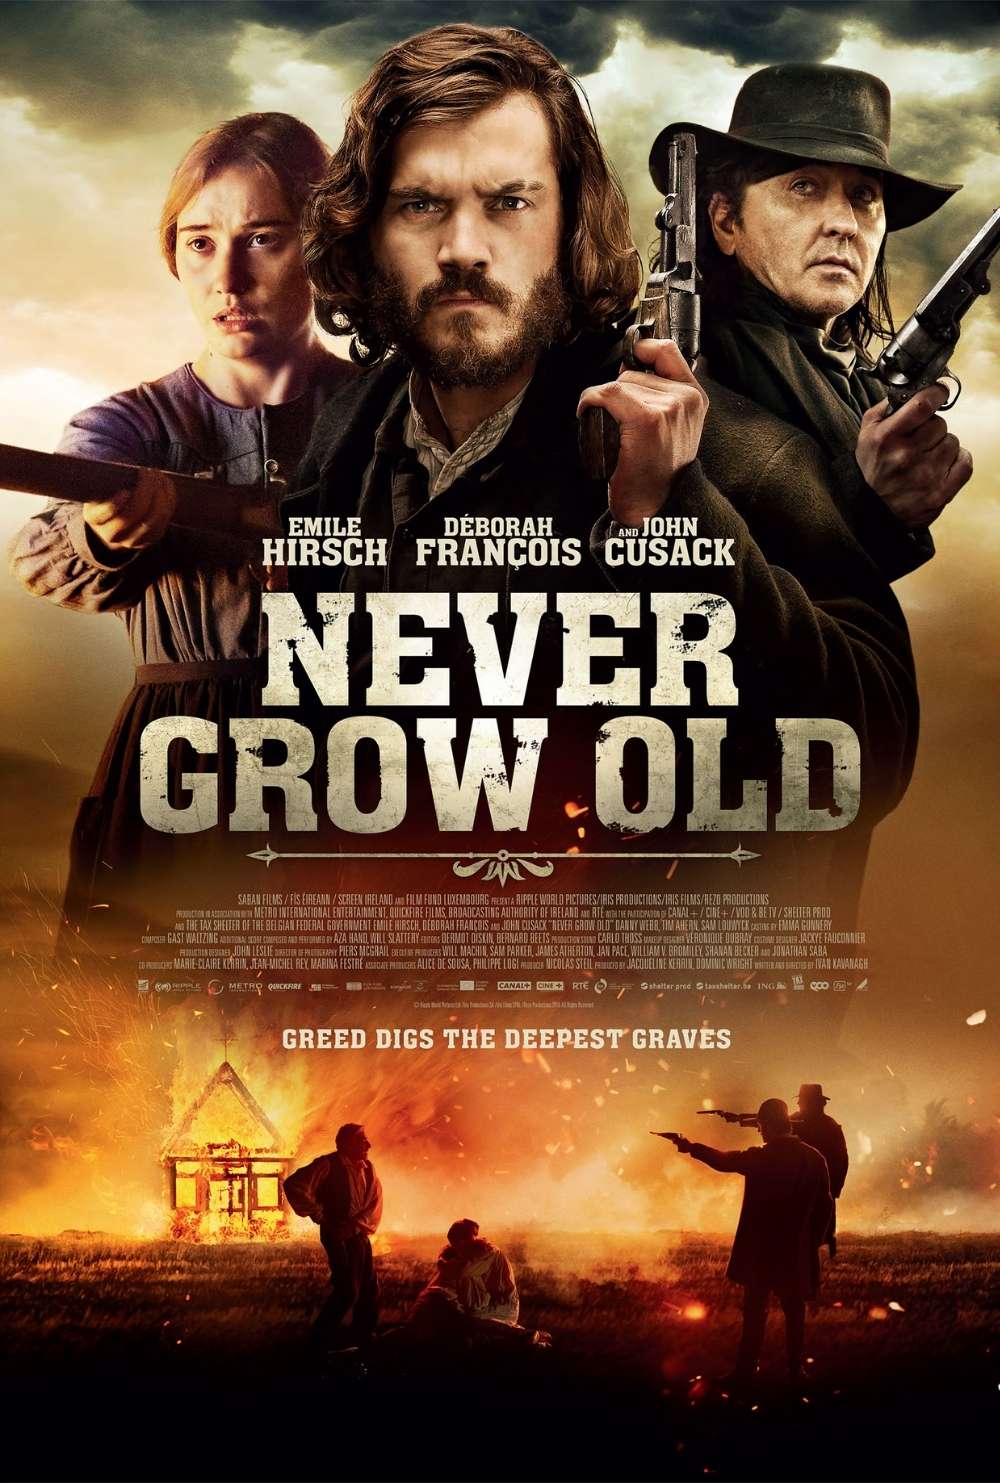 Never Grow Old (2019)  Best John Cusack Movies (Ranked)